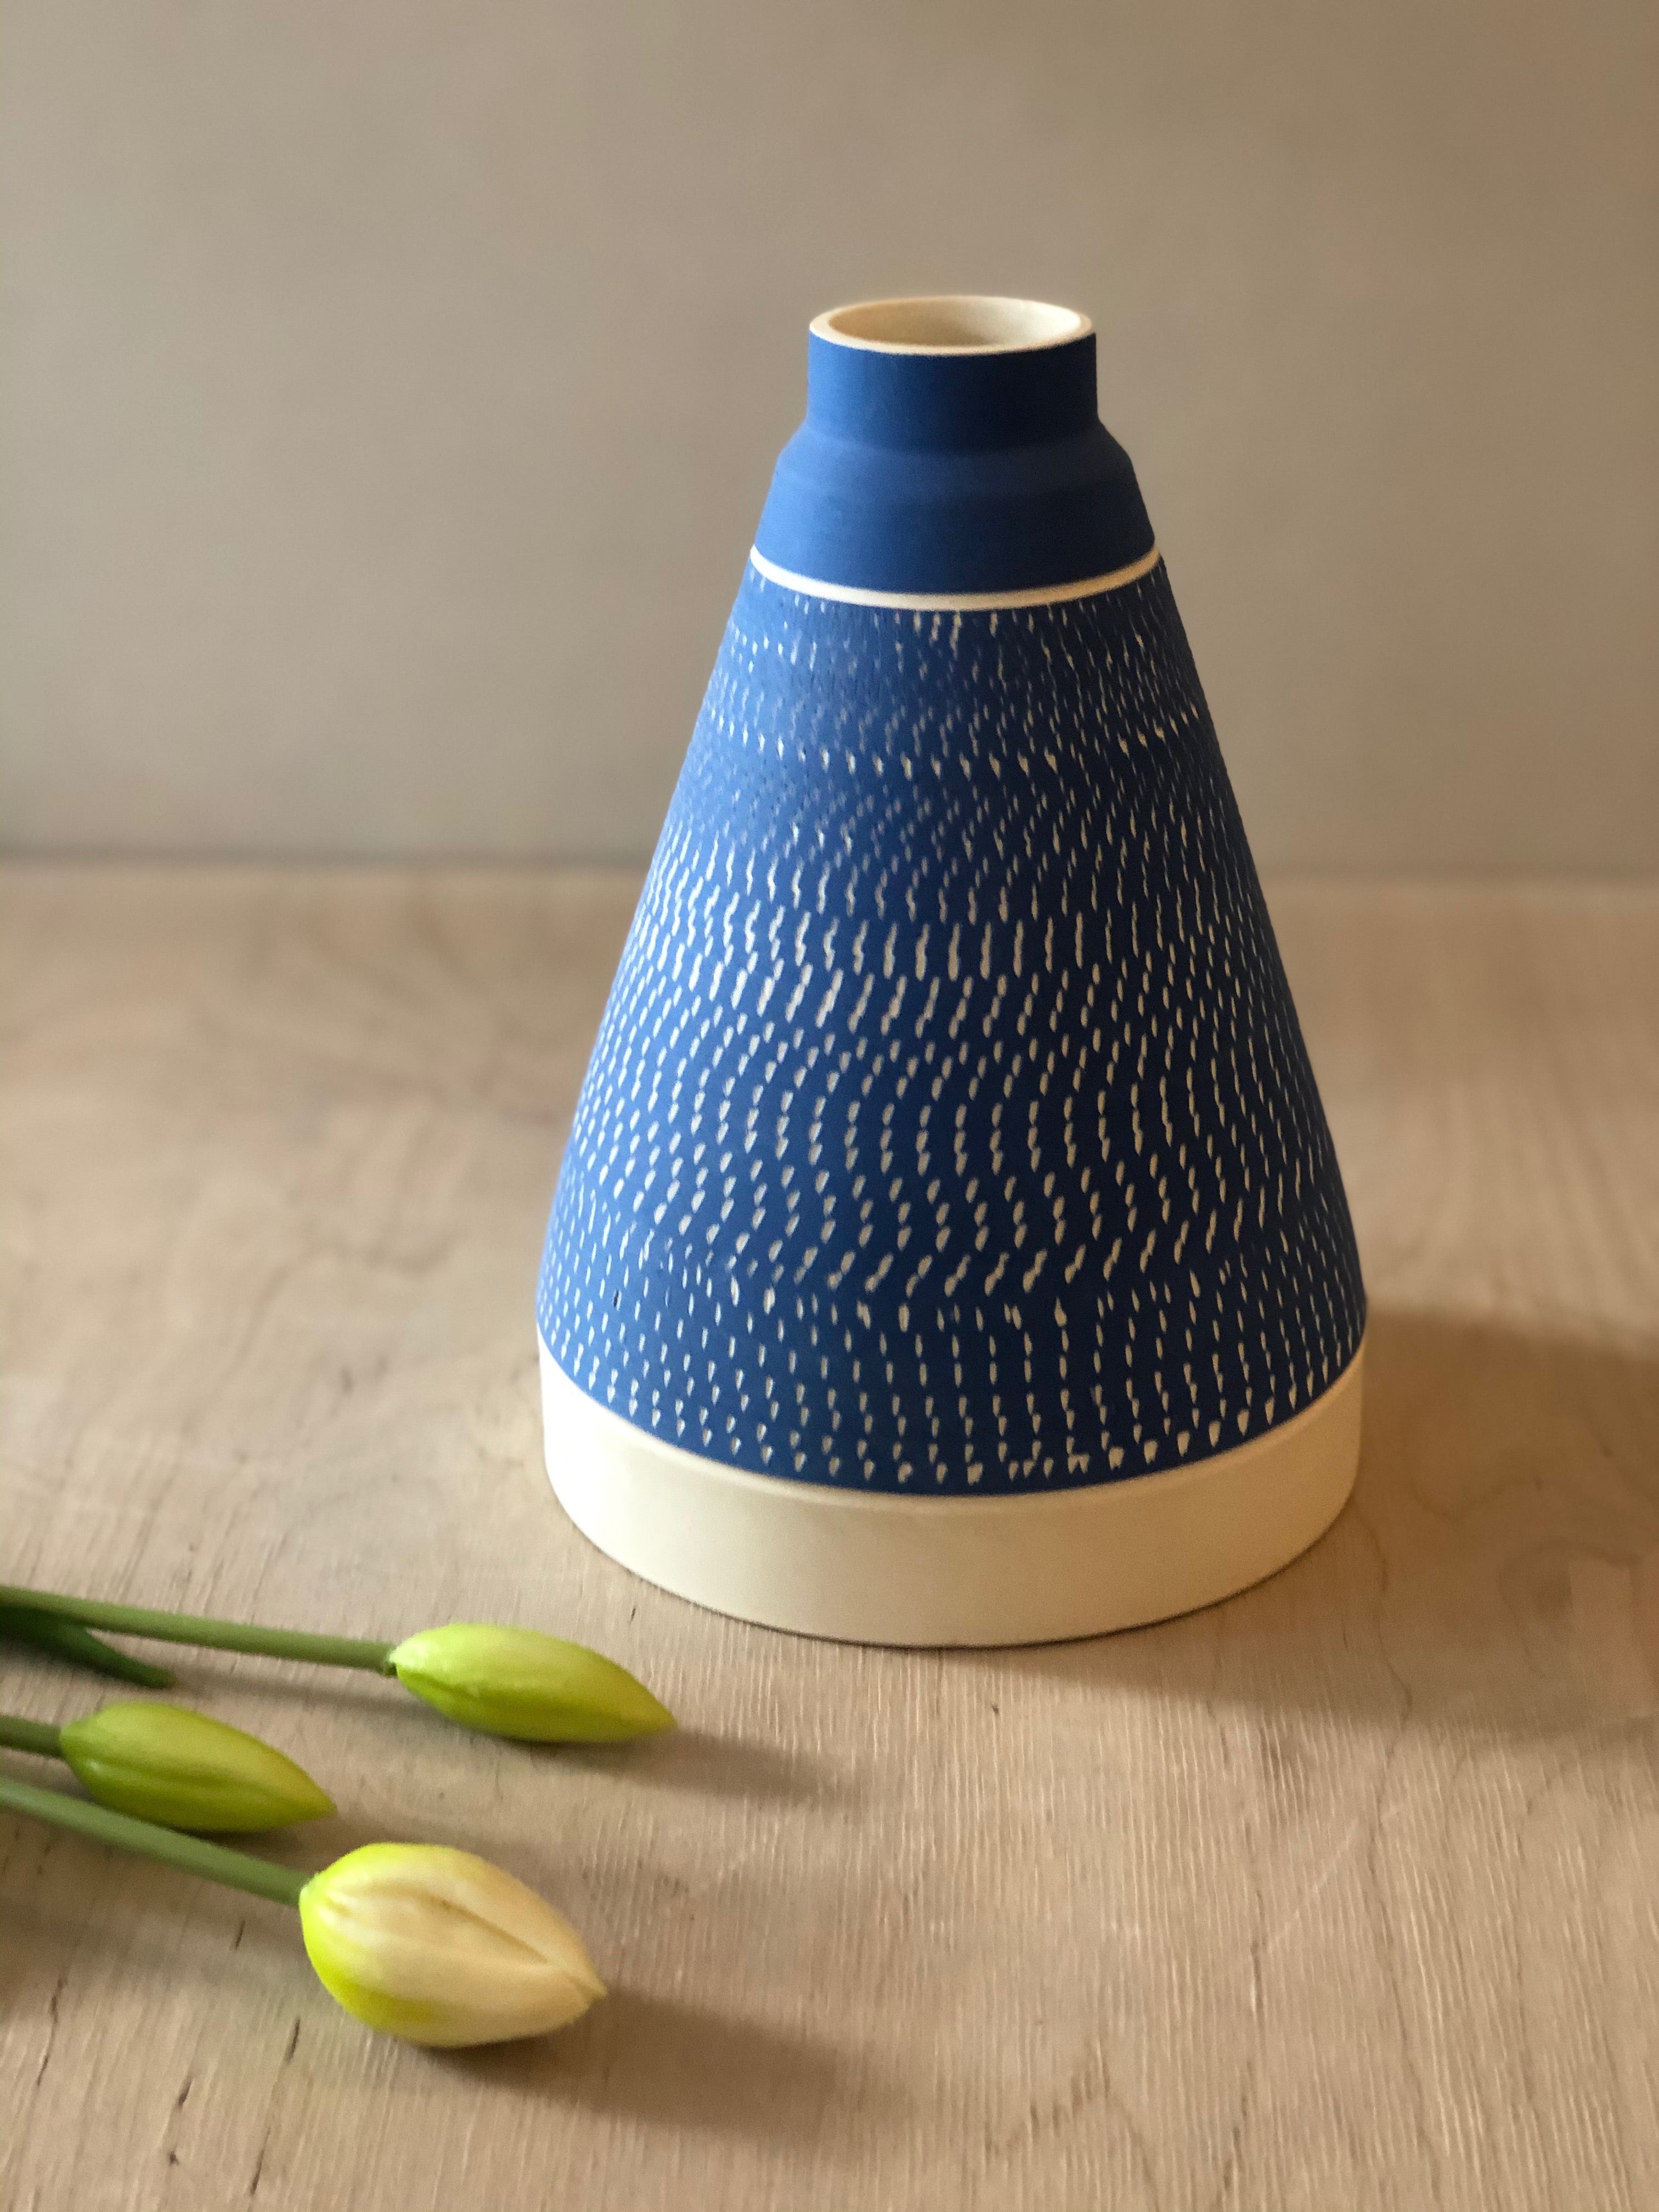 Tall blue pyramid vase with chattering decoration